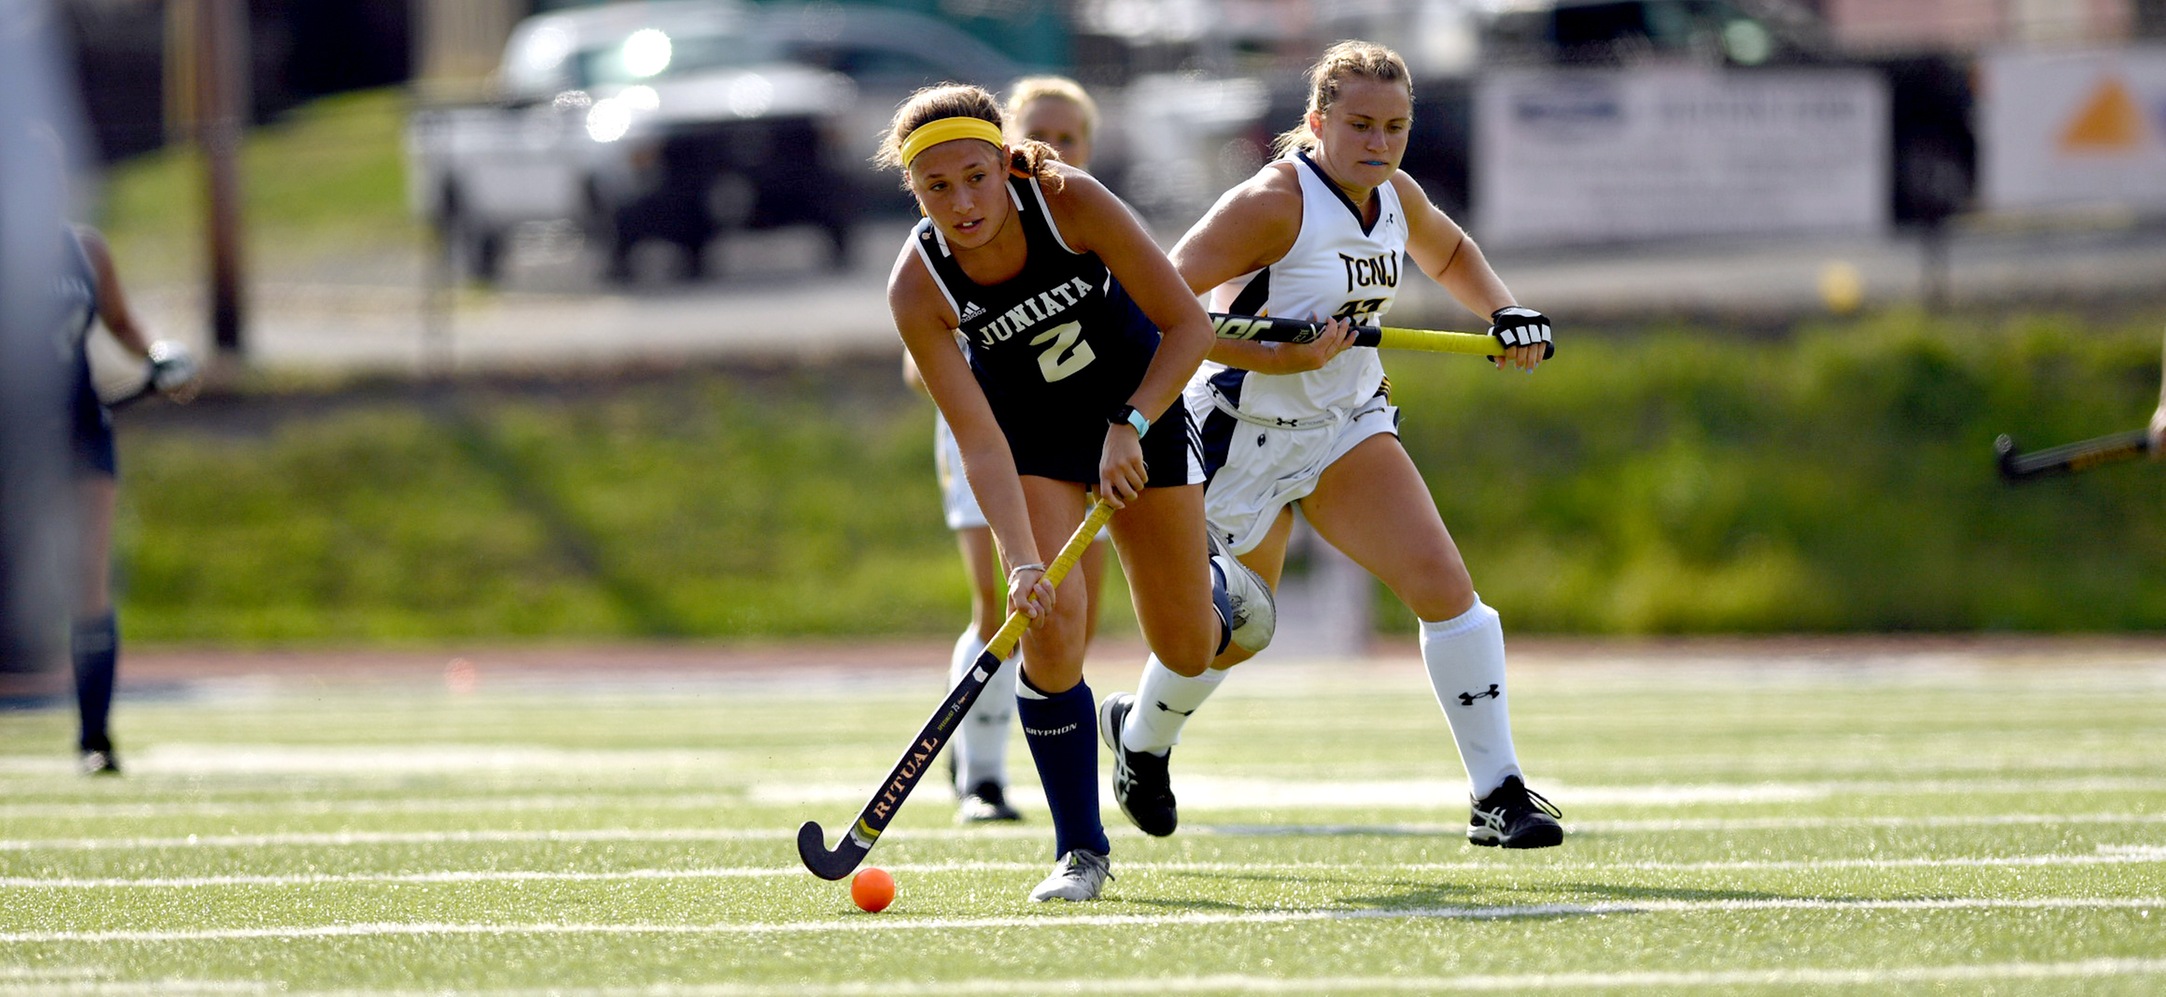 Grace Alexander totaled two goals and added an assist in the Eagles, 6-0 win over Goucher.